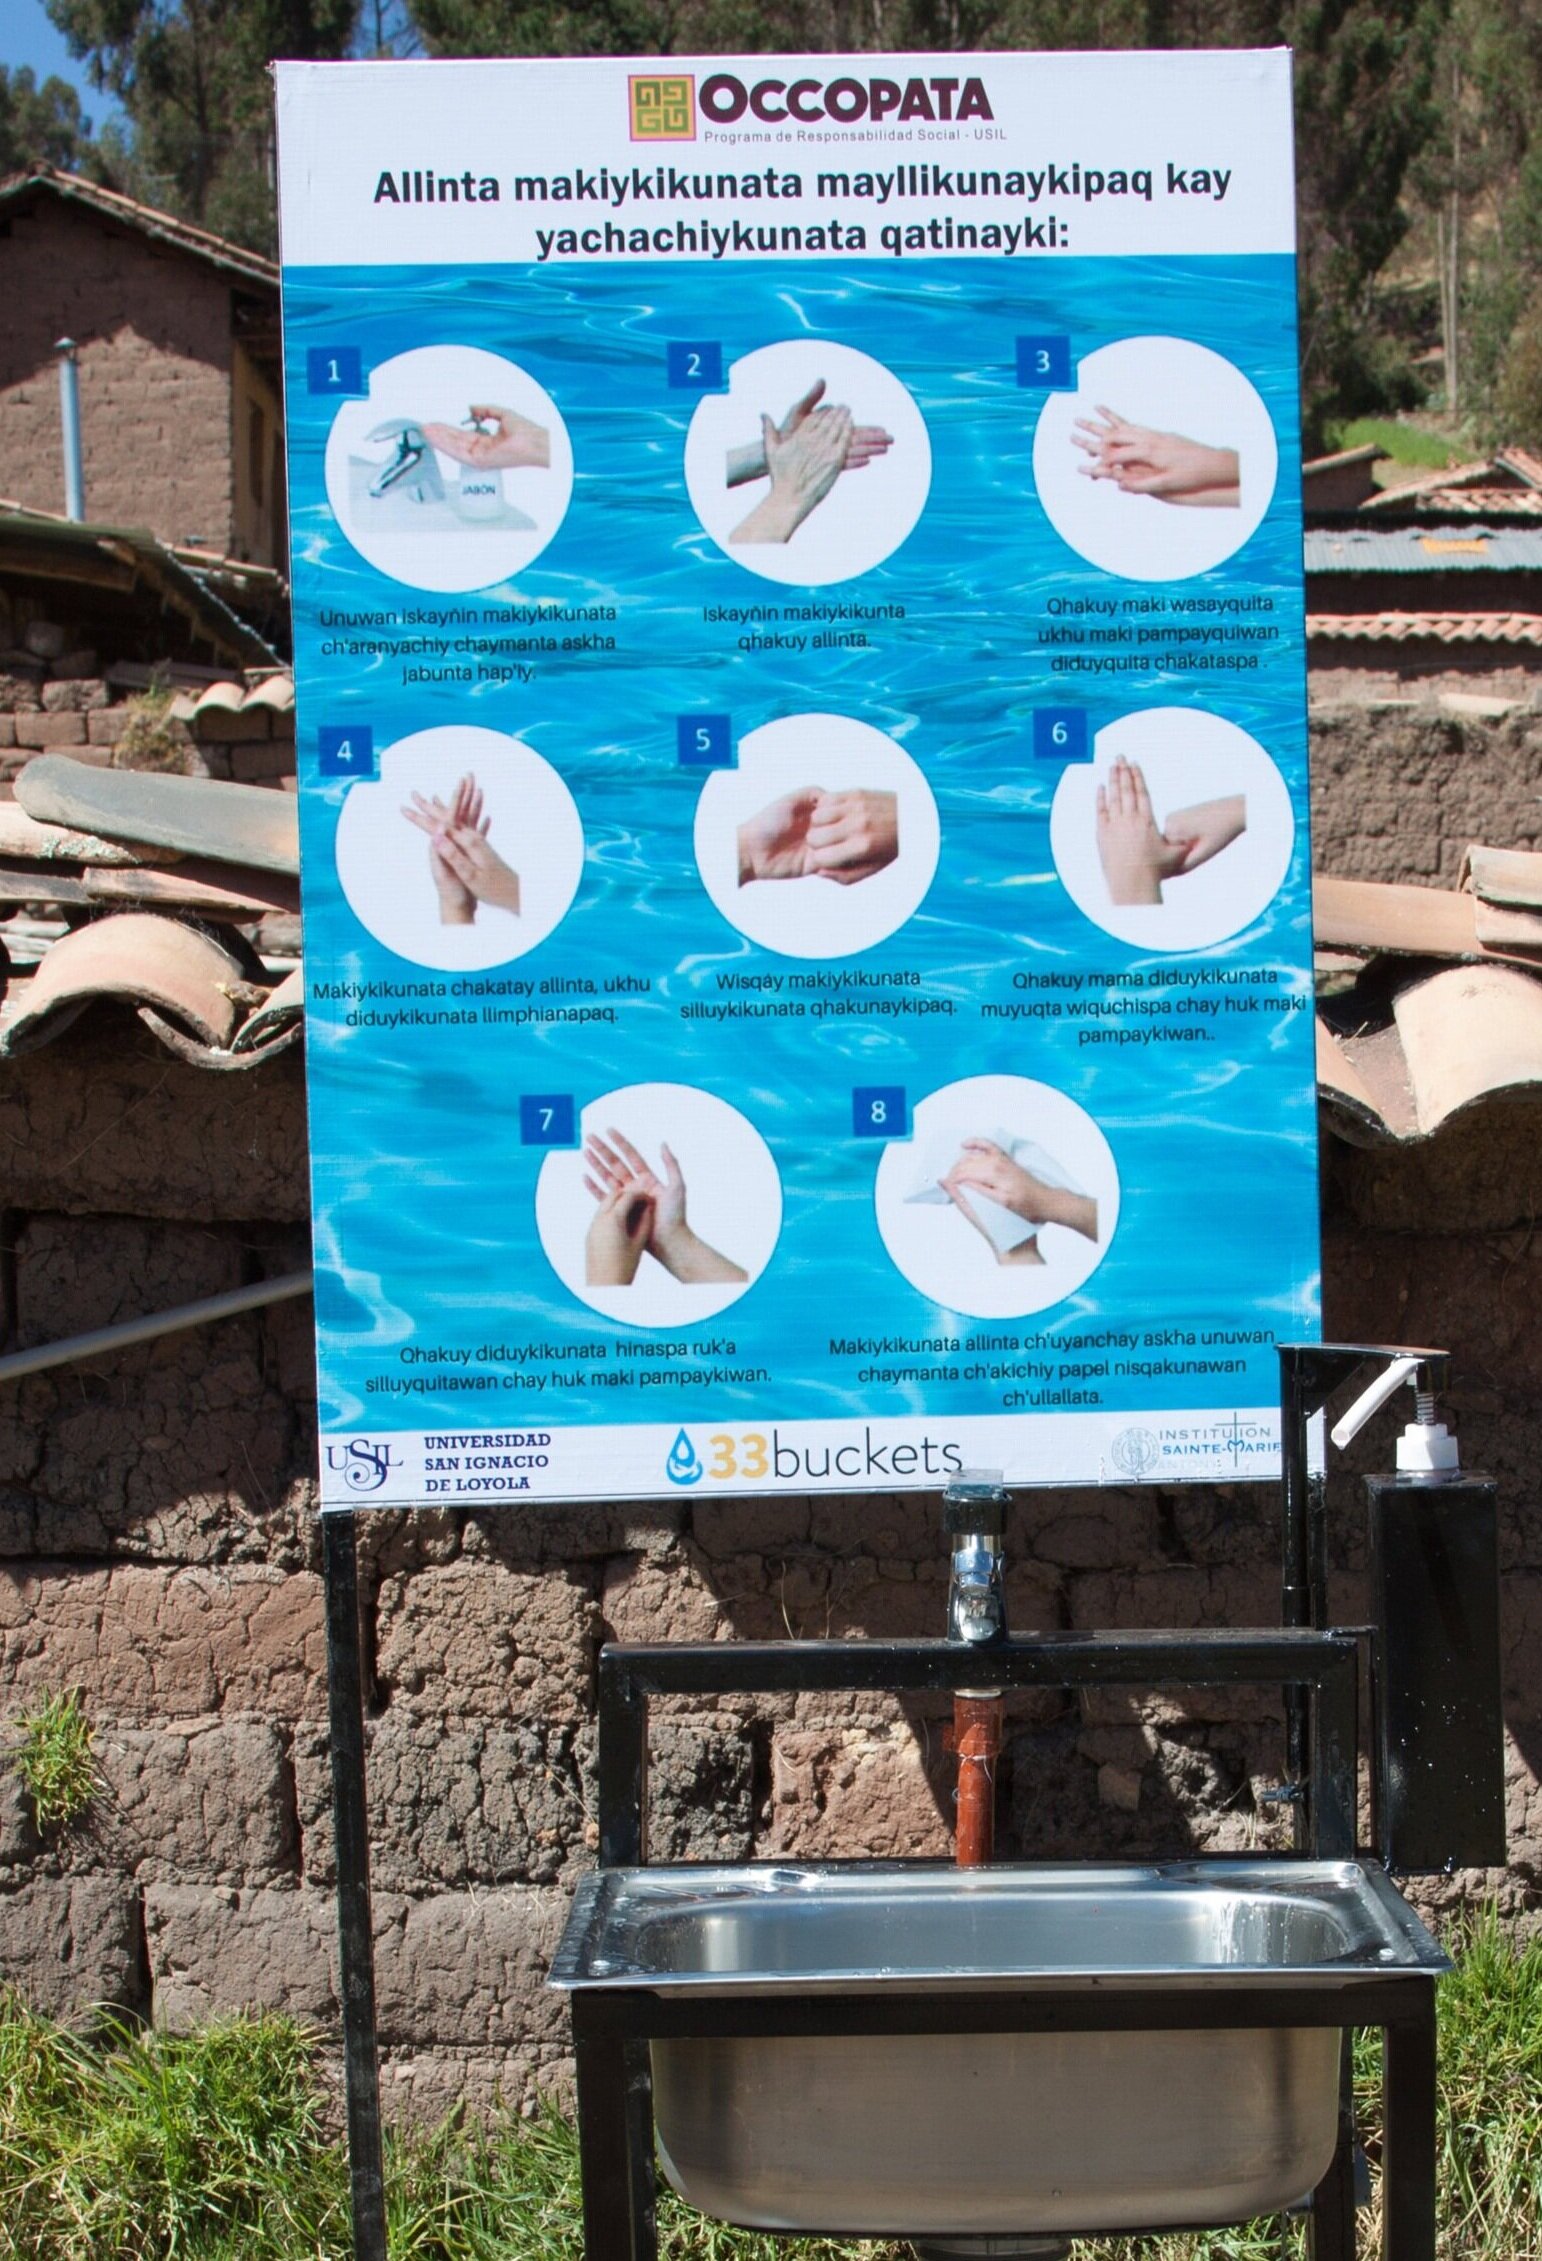  Occopata now has two public handwashing stations with soap and clean, running water 